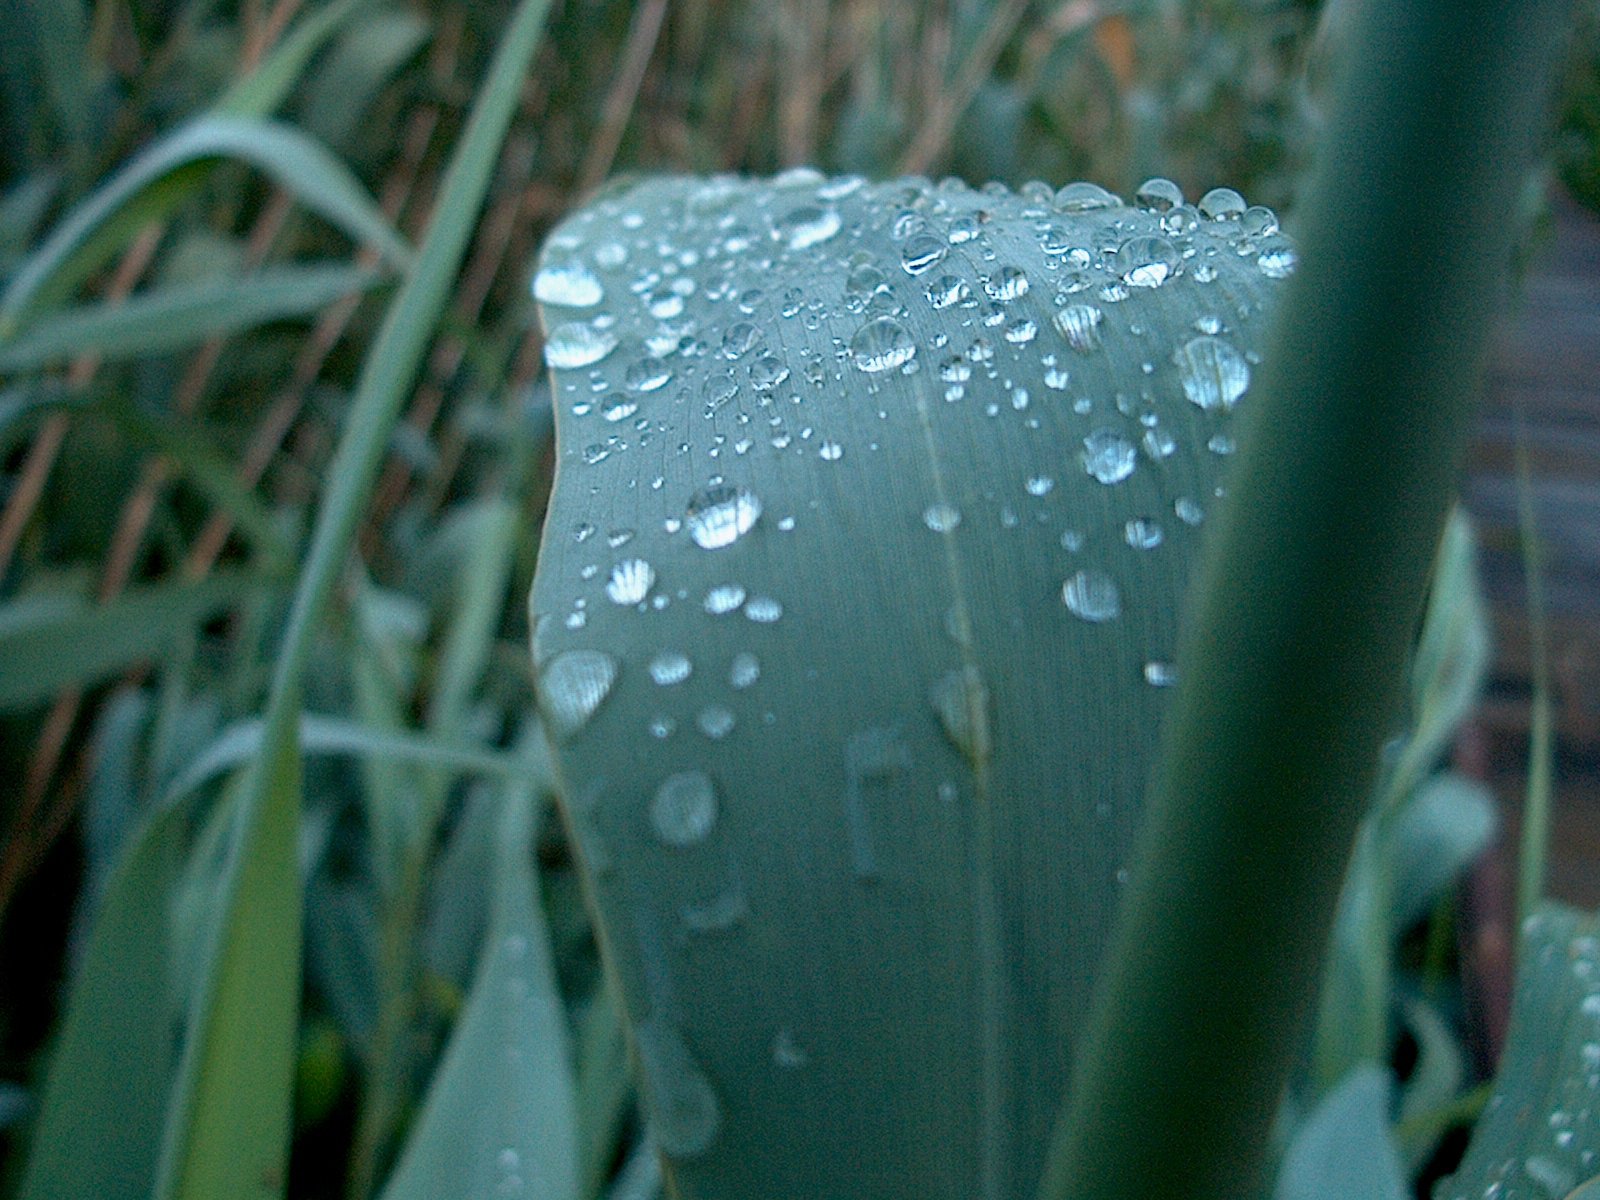 water drops sit on the surface of a green plant